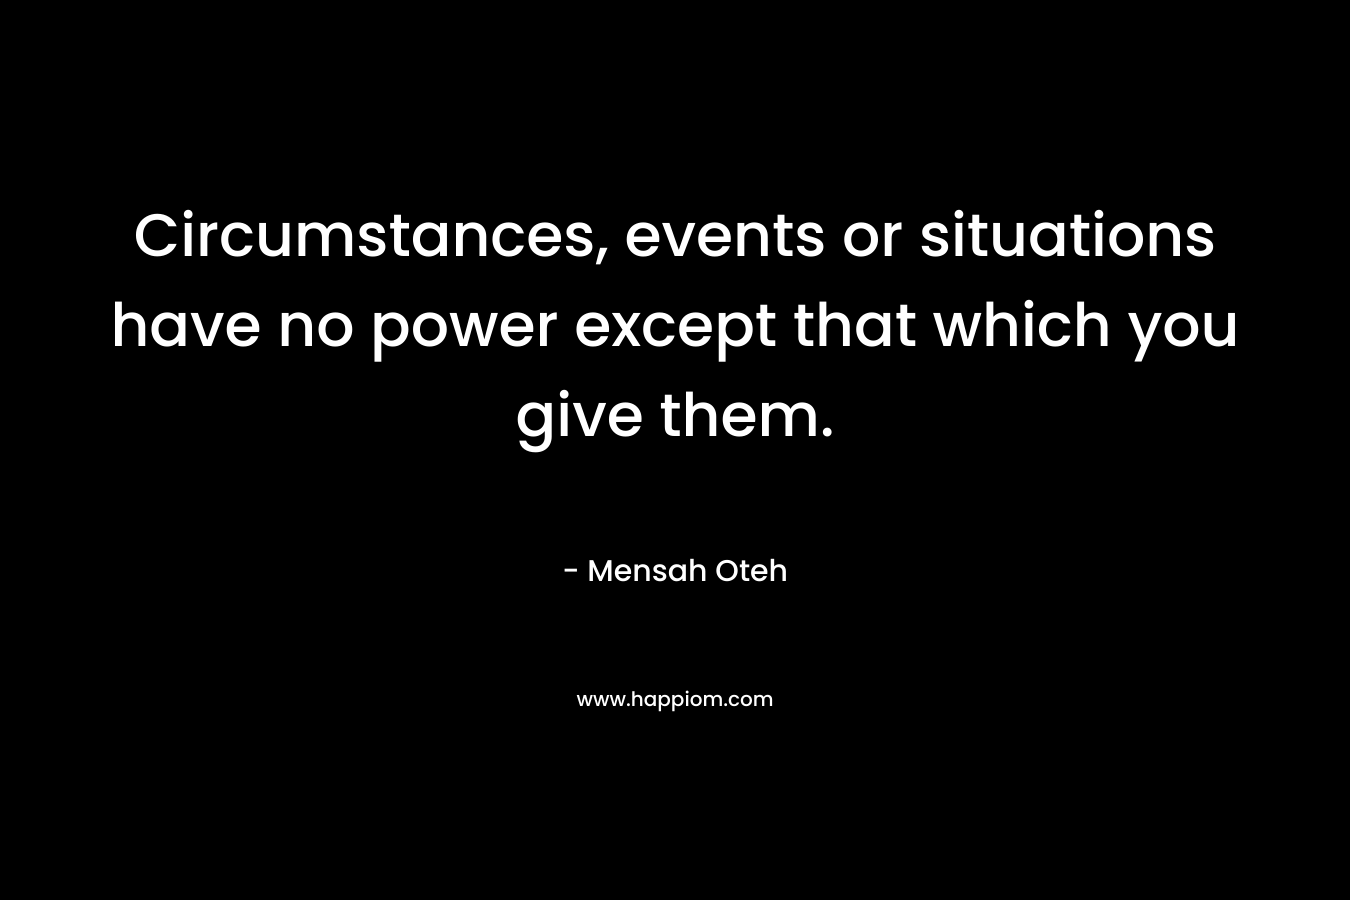 Circumstances, events or situations have no power except that which you give them.